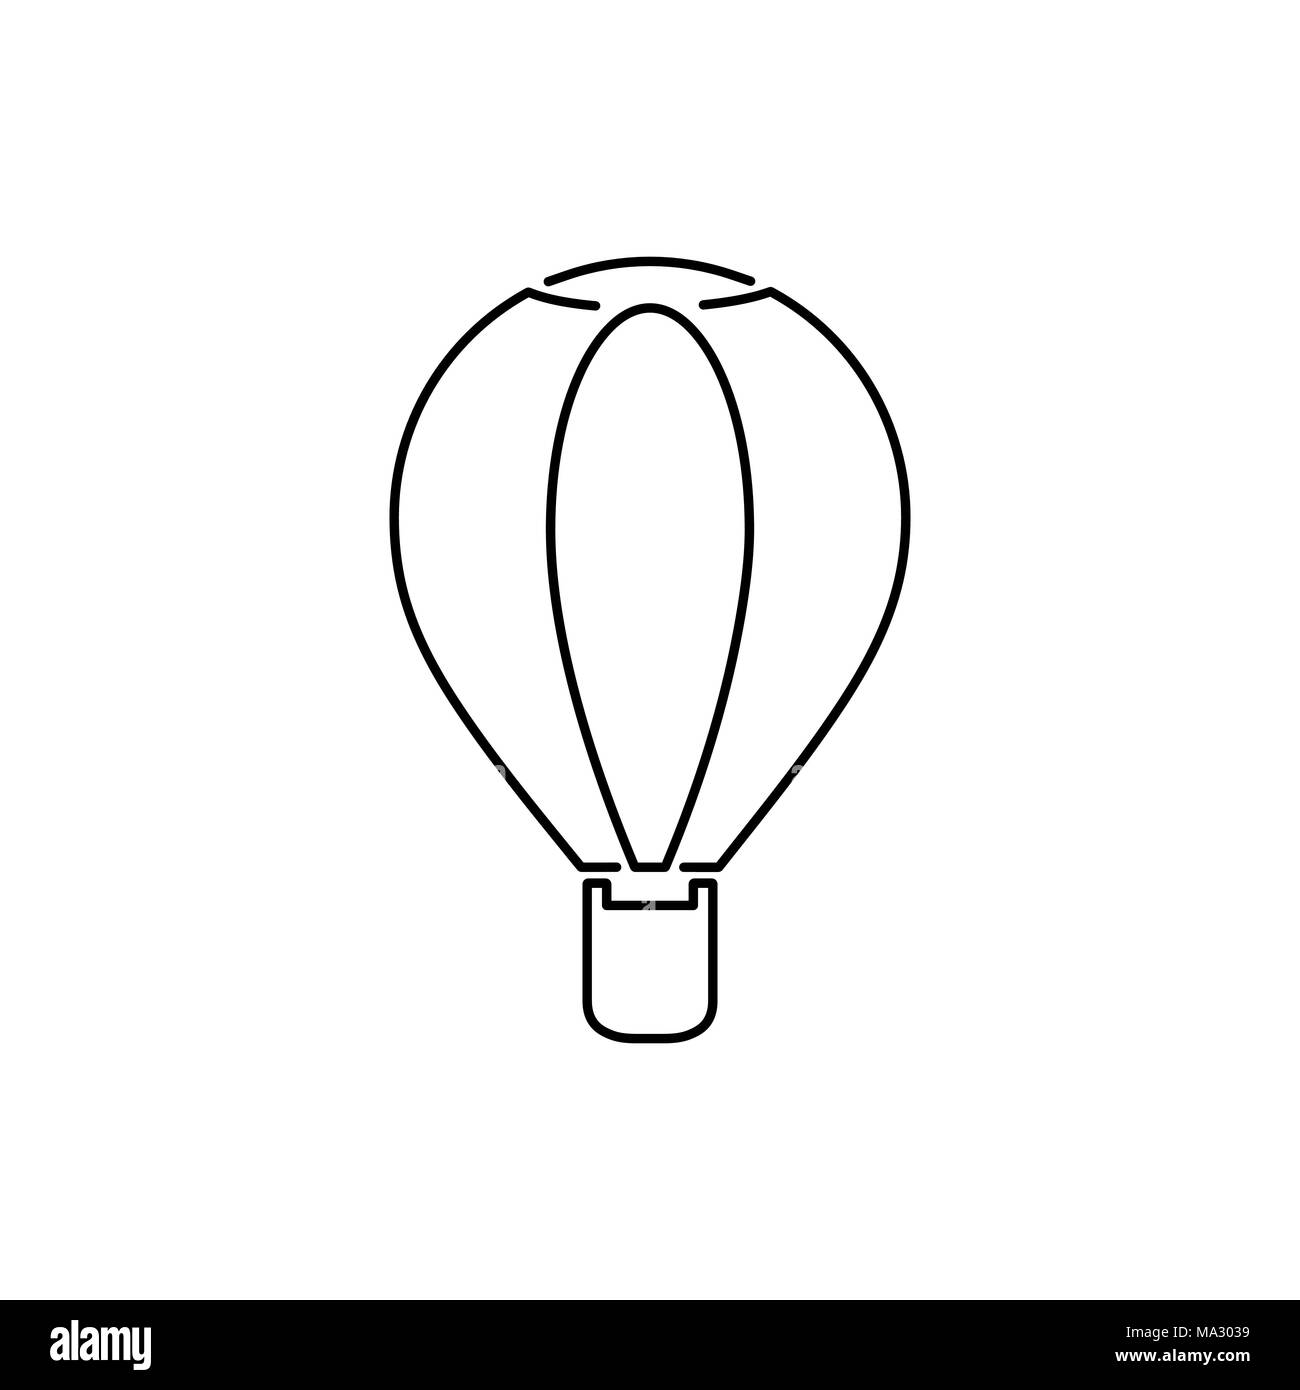 Air baloon icon simple flat style illustration. Stock Vector